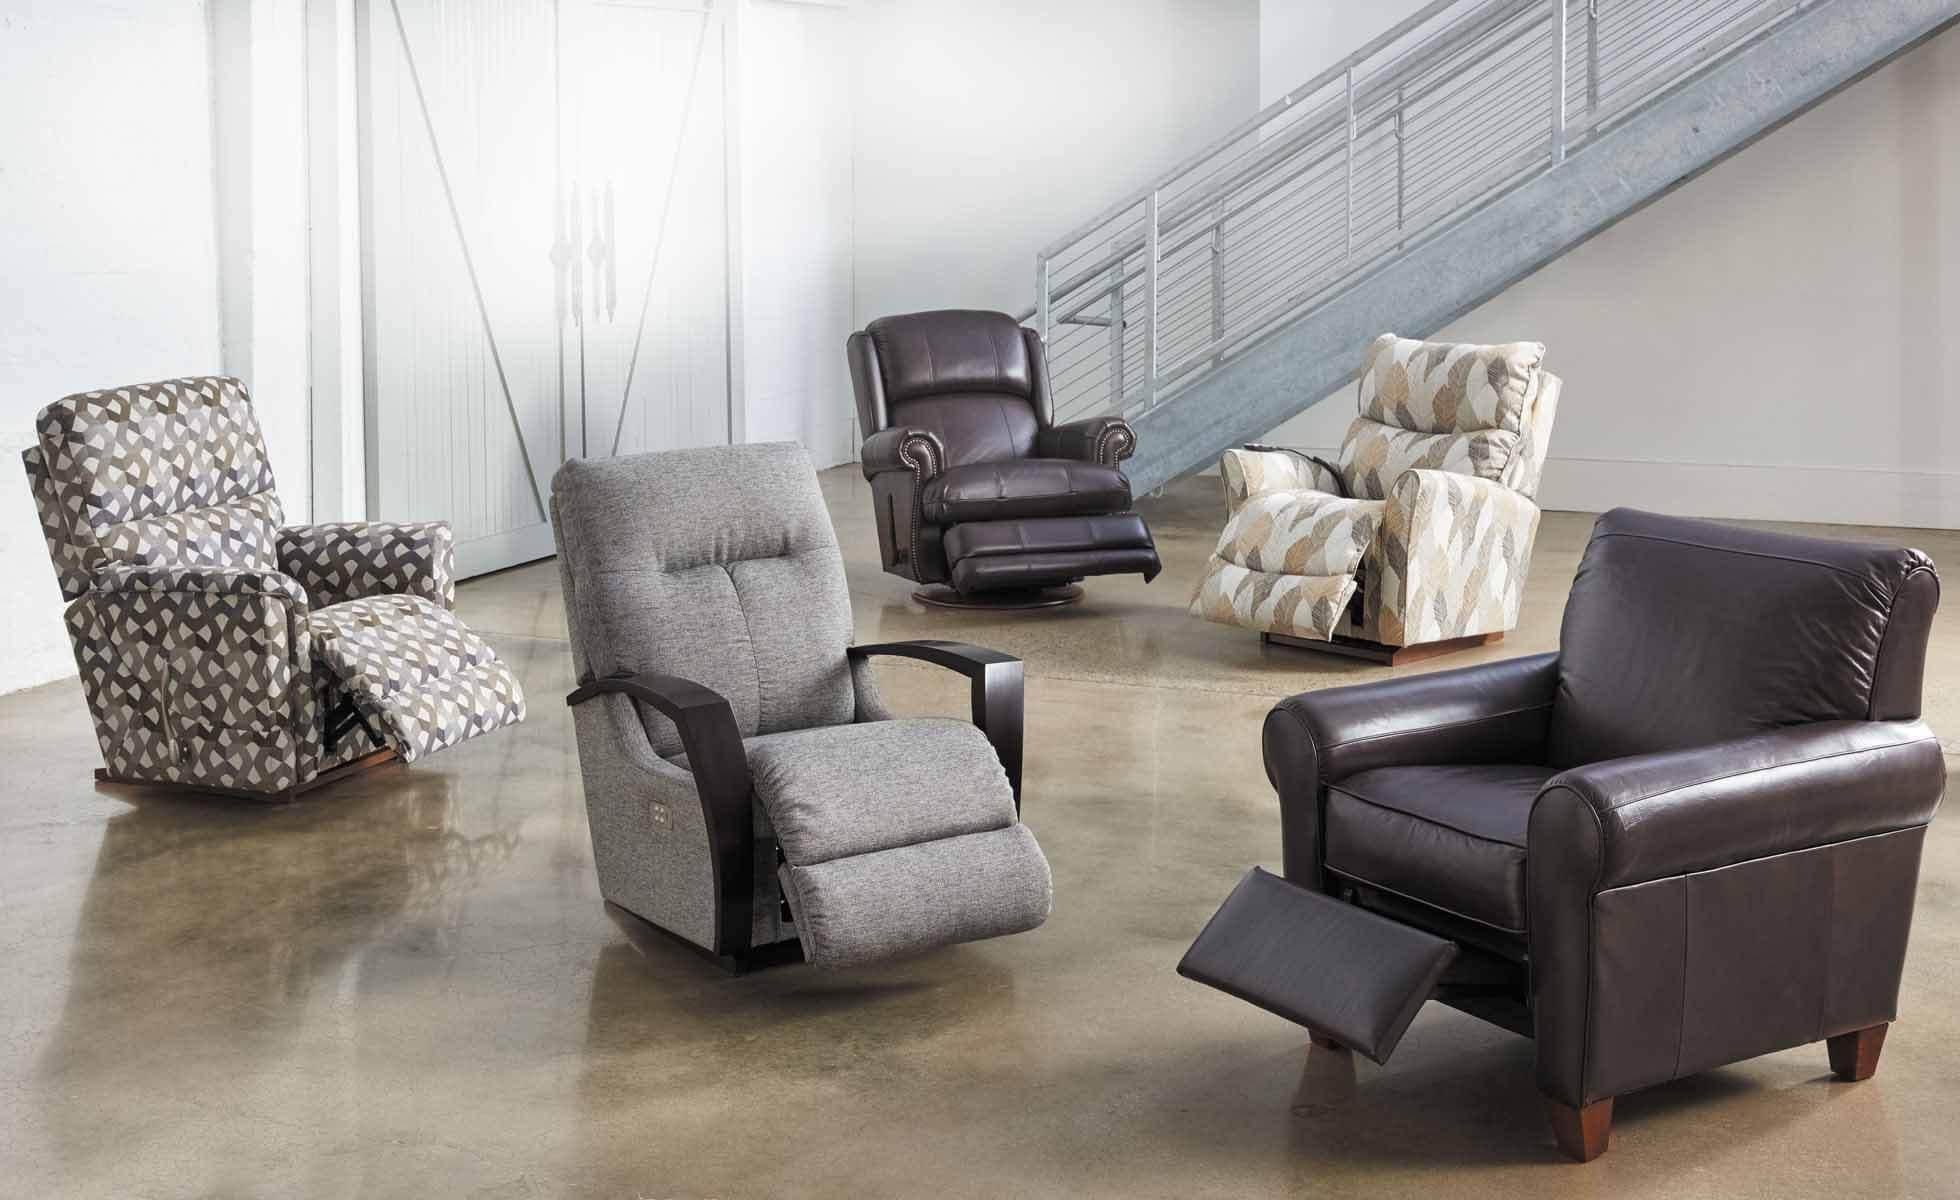 Sofas or Recliners